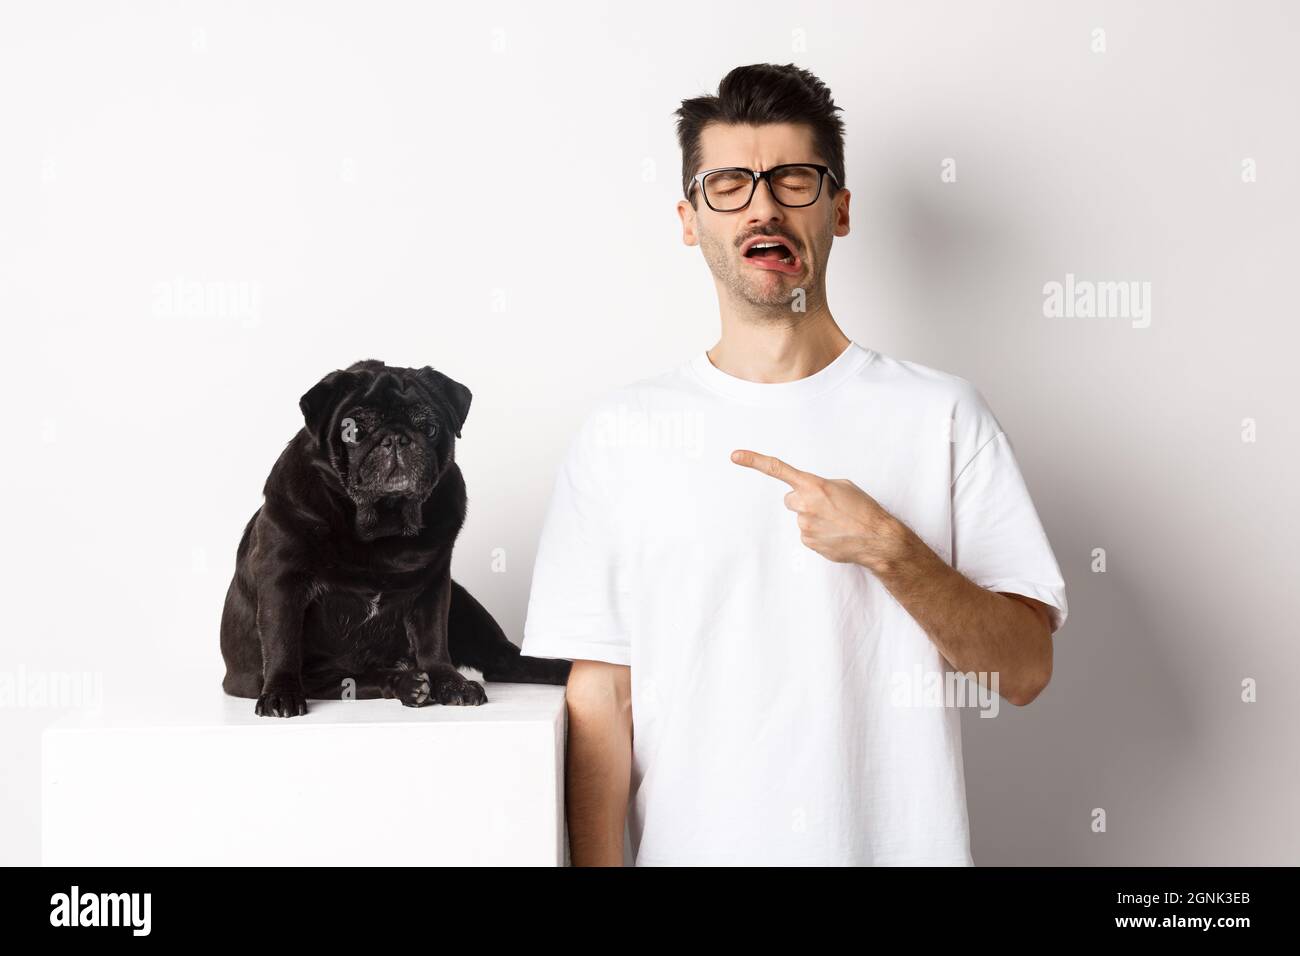 Upset crying man pointing at cute black pug and sobbing, complaining on his pet, standing sad against white background Stock Photo